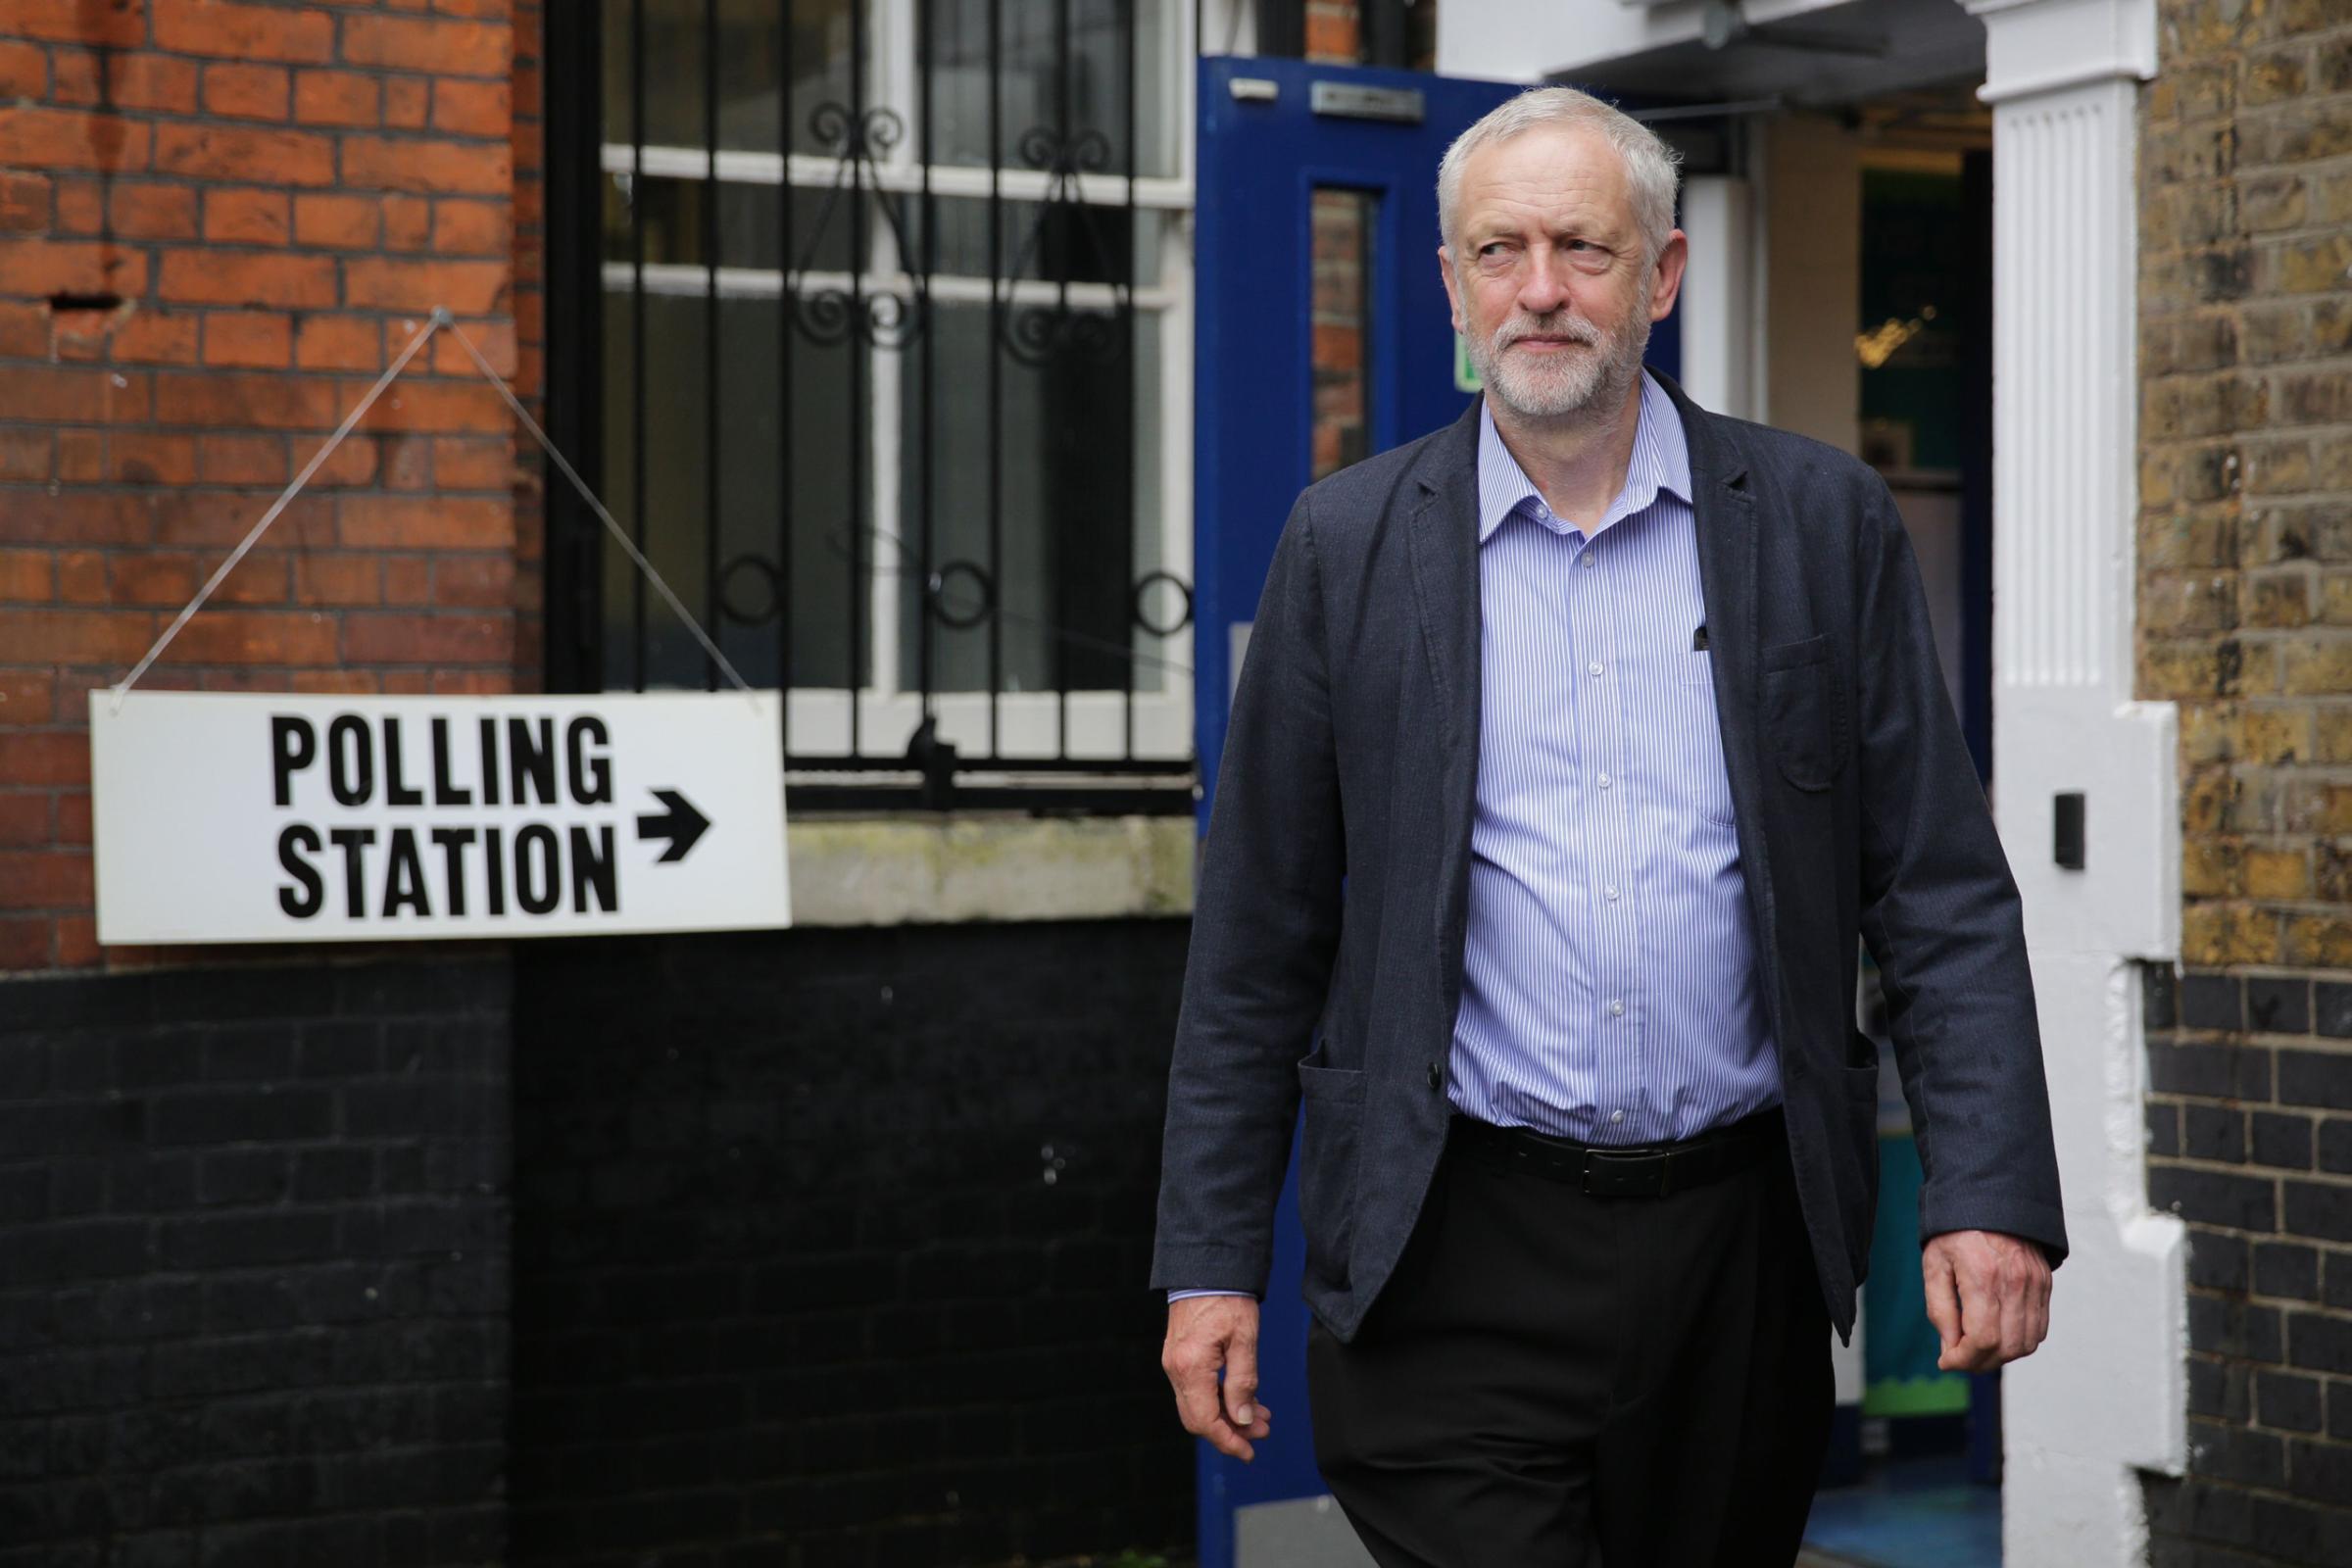 EU referendum. Labour Party leader Jeremy Corbyn leaves after casting his vote at a polling station in Islington, London, as voters head to the polls across the UK in a historic referendum on whether the UK should remain a member of the European Union or leave. Picture date: Thursday June 23, 2016. See PA story POLITICS EU. Photo credit should read: Daniel Leal-Olivas/PA Wire URN:26689528